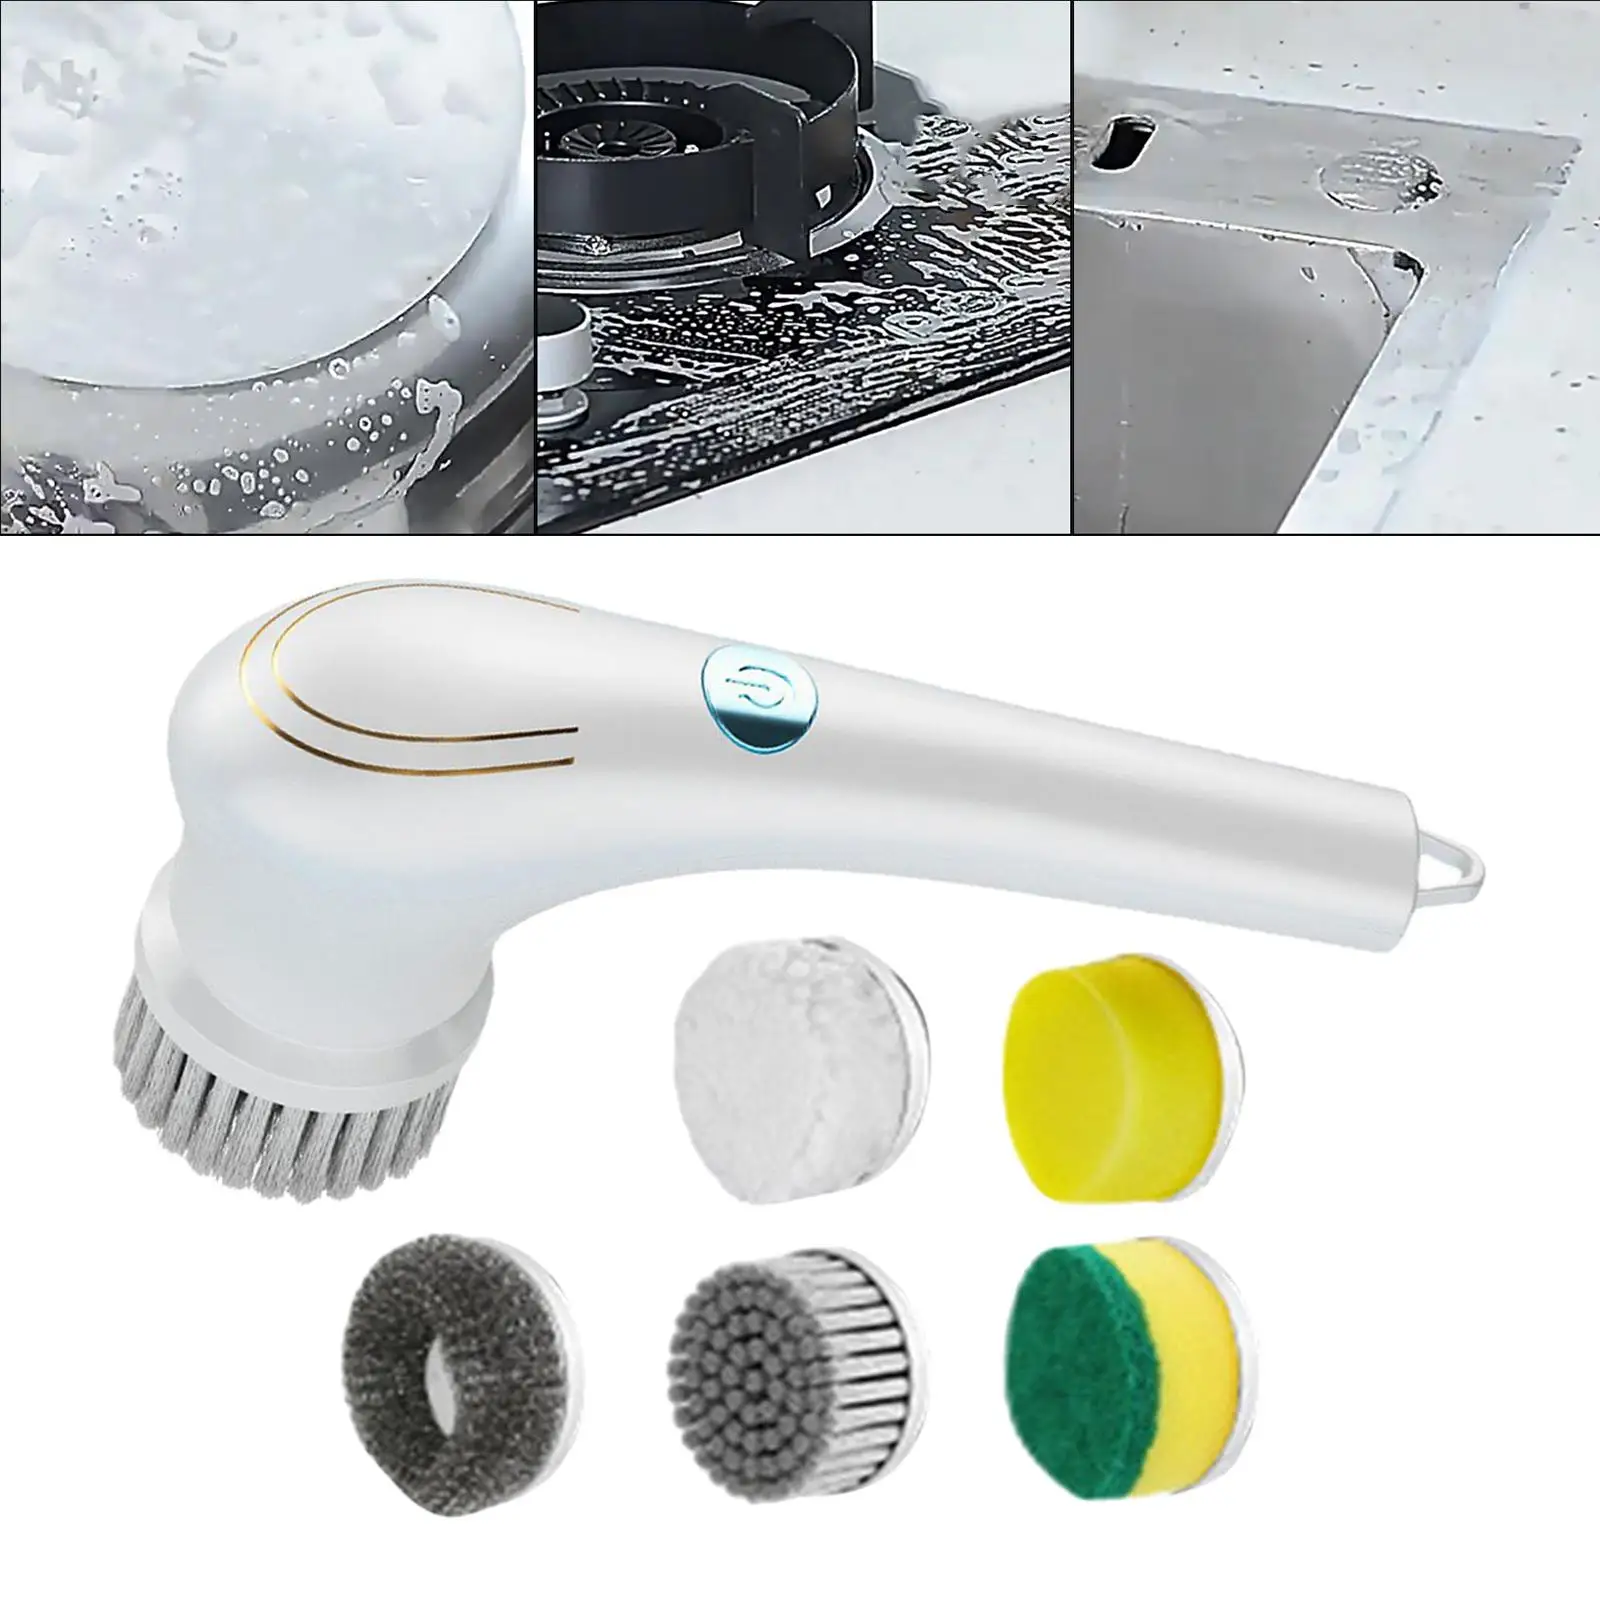 Cordless Electric Scrubber Handheld with 5 Brush Heads for Tile Bathtub Sink